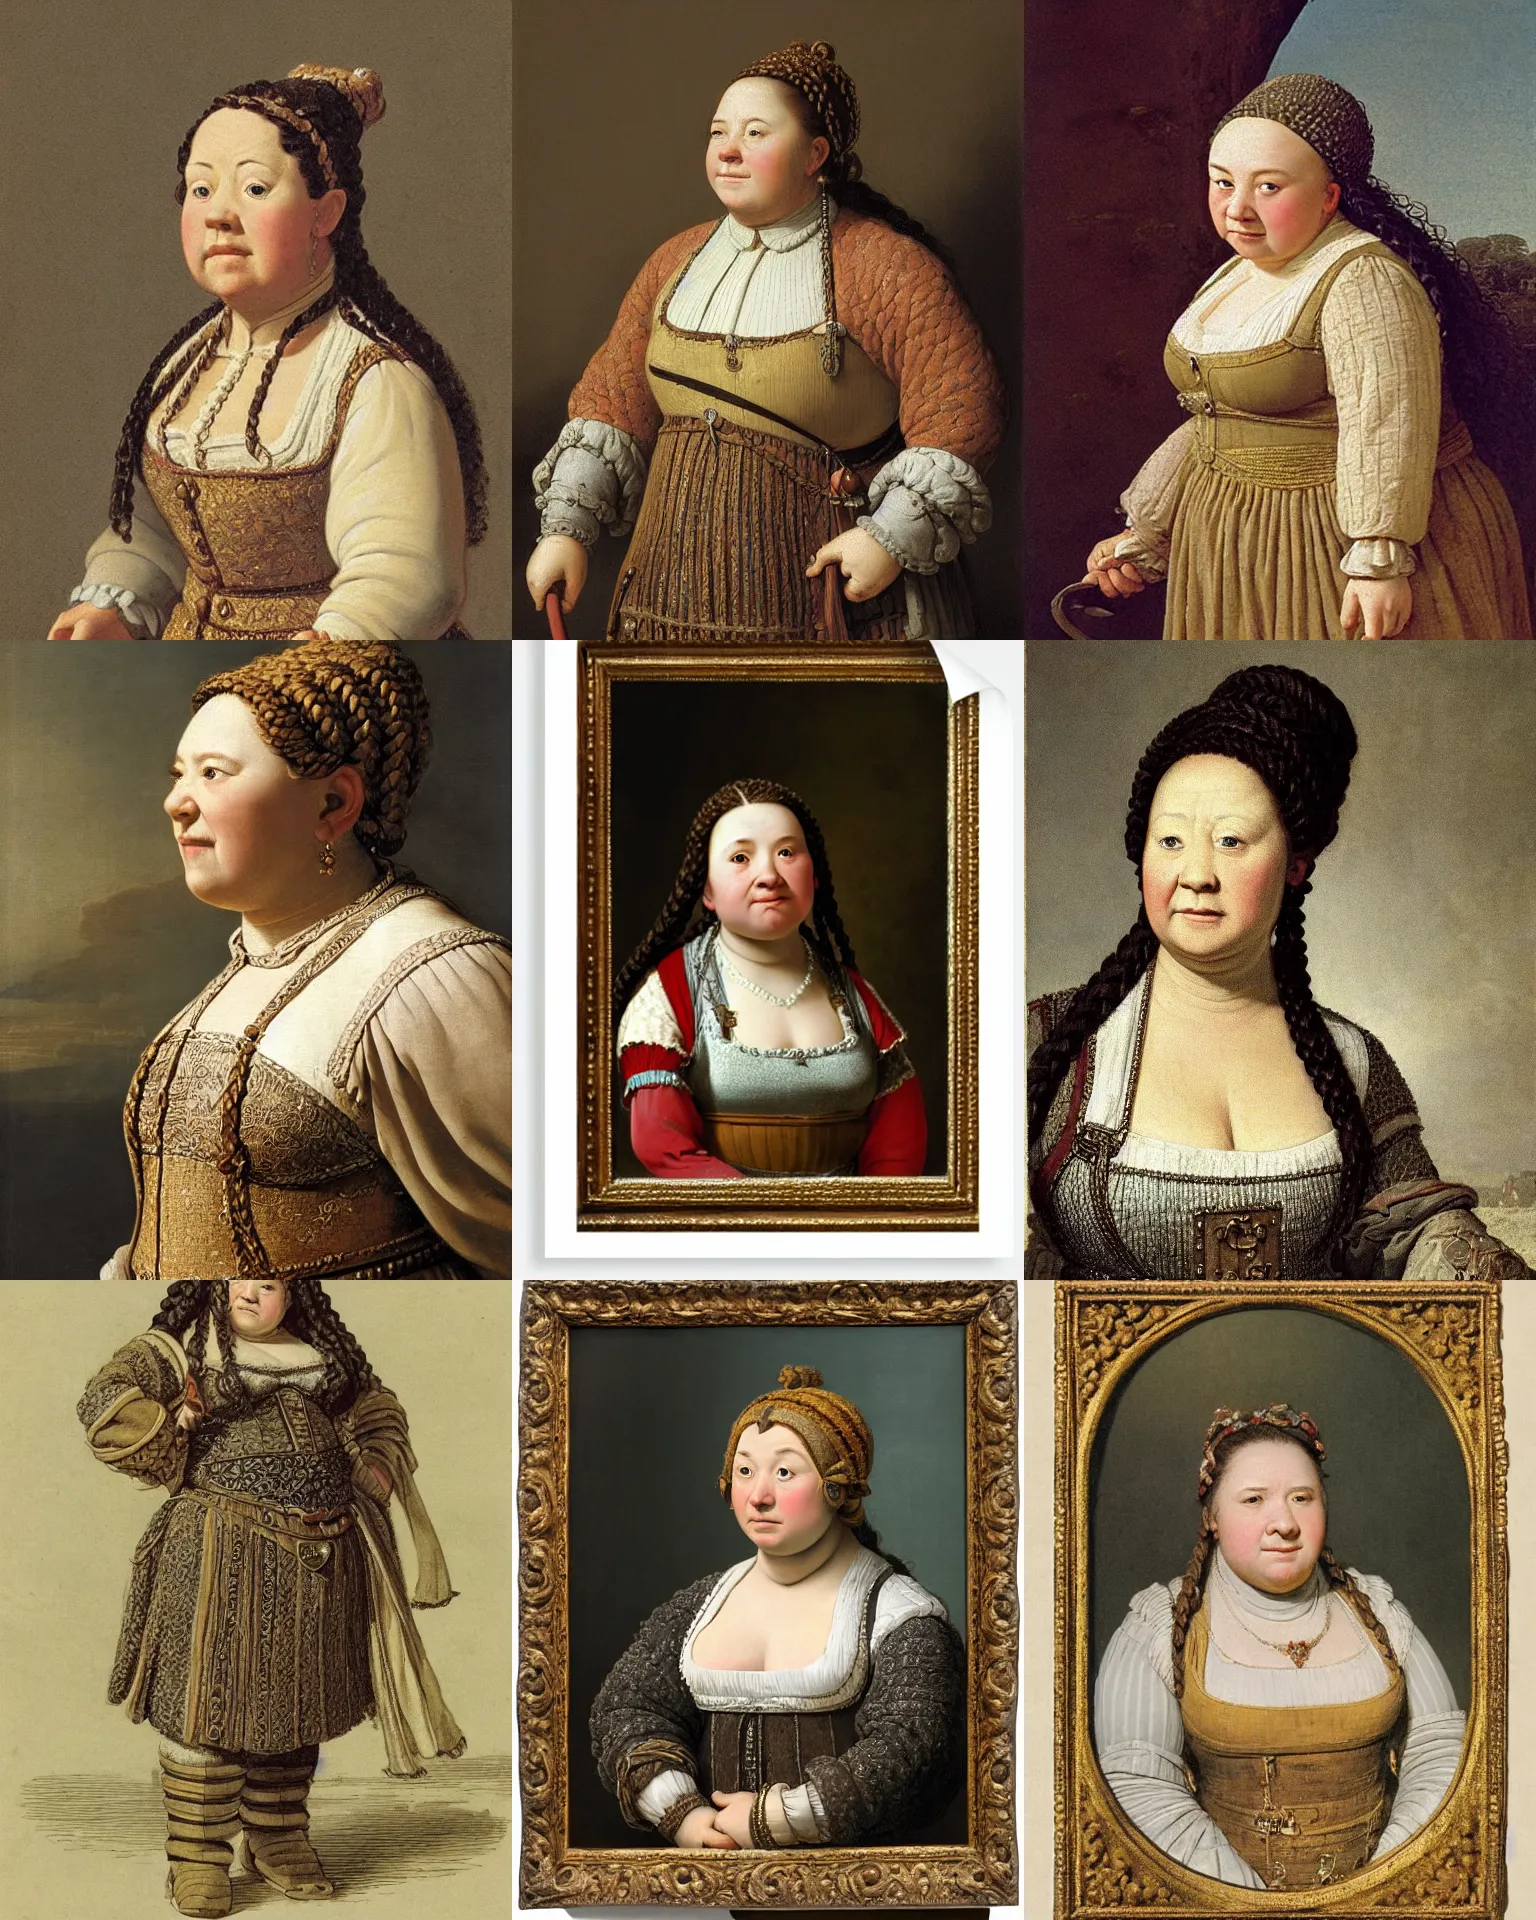 Prompt: female dwarven noblewoman, chubby short stature, braided intricate hair, by canaletto